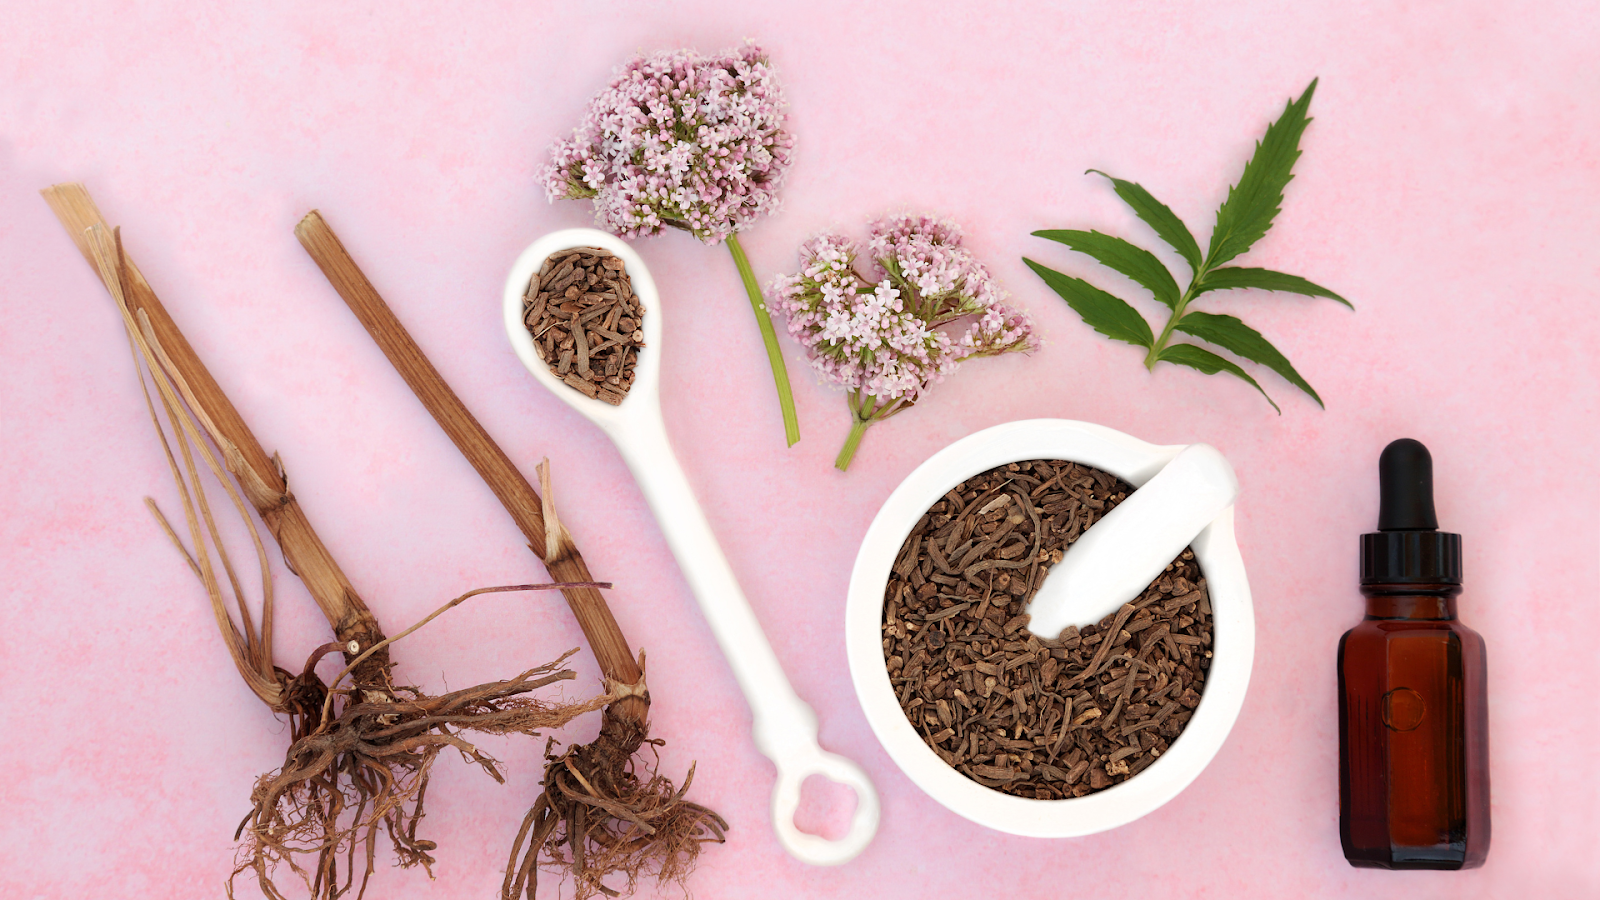 Valerian for relaxation and sleep